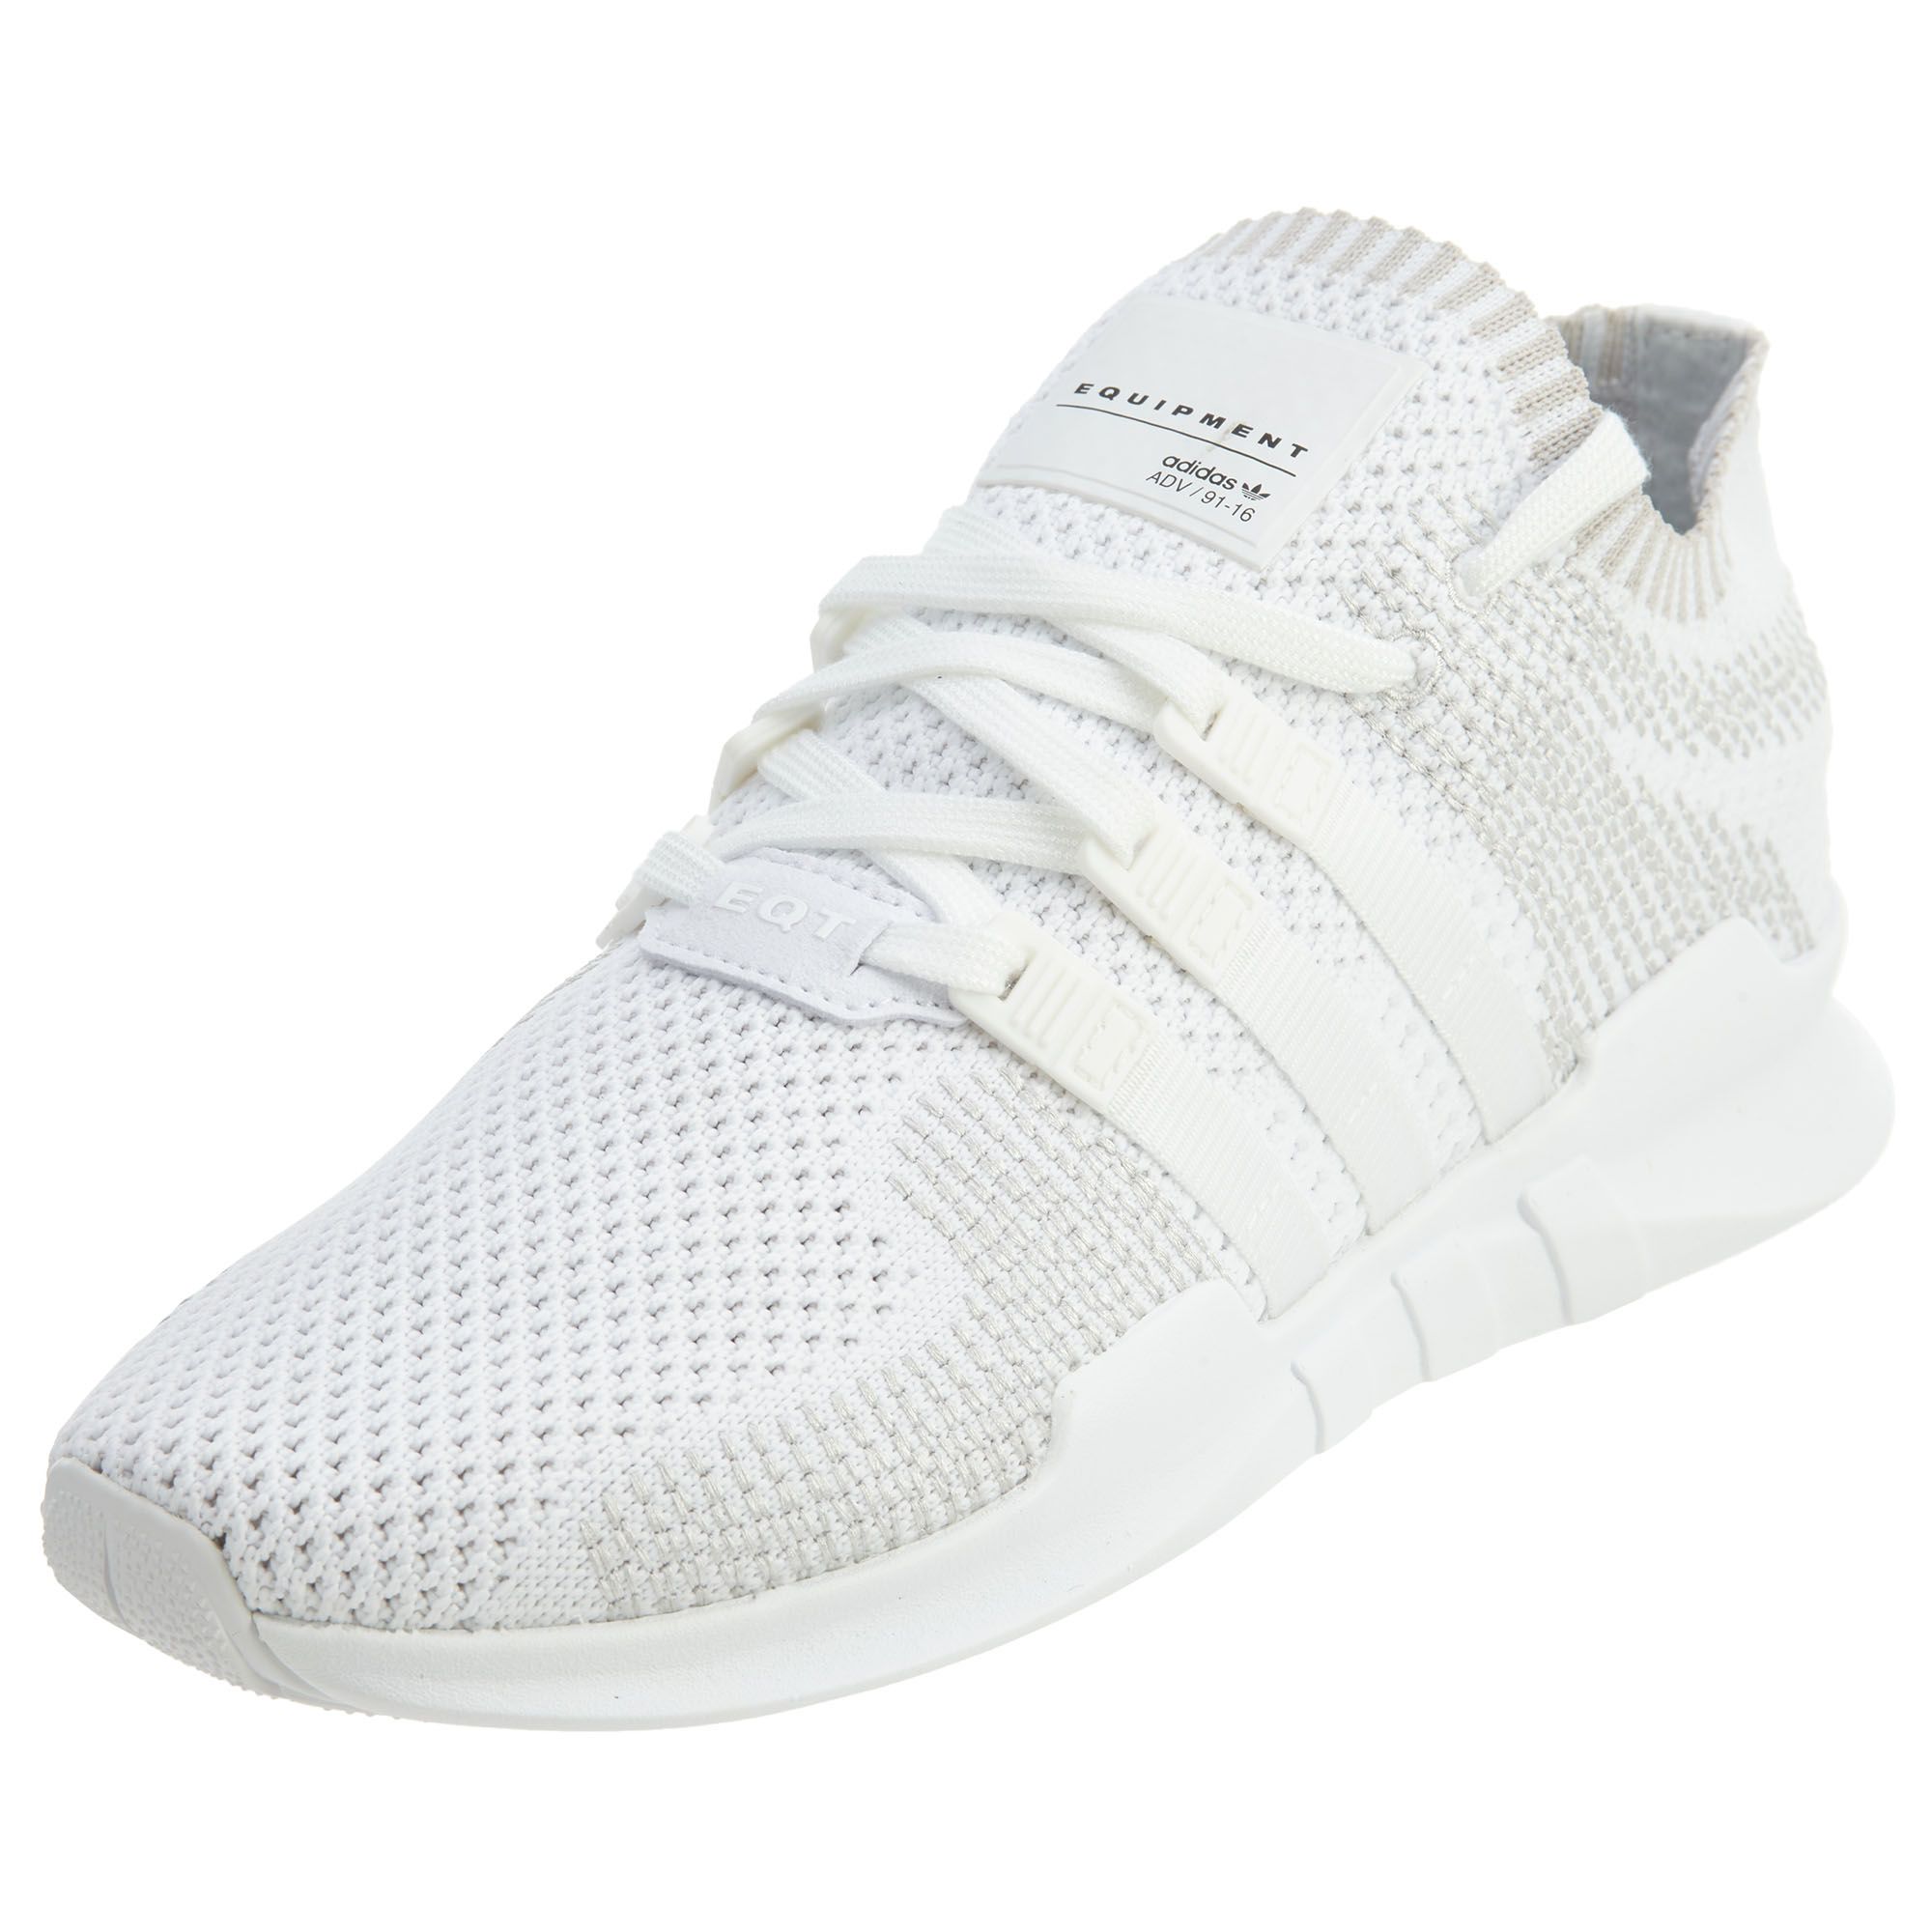 Adidas Eqt Support Adv Pk Mens Style 